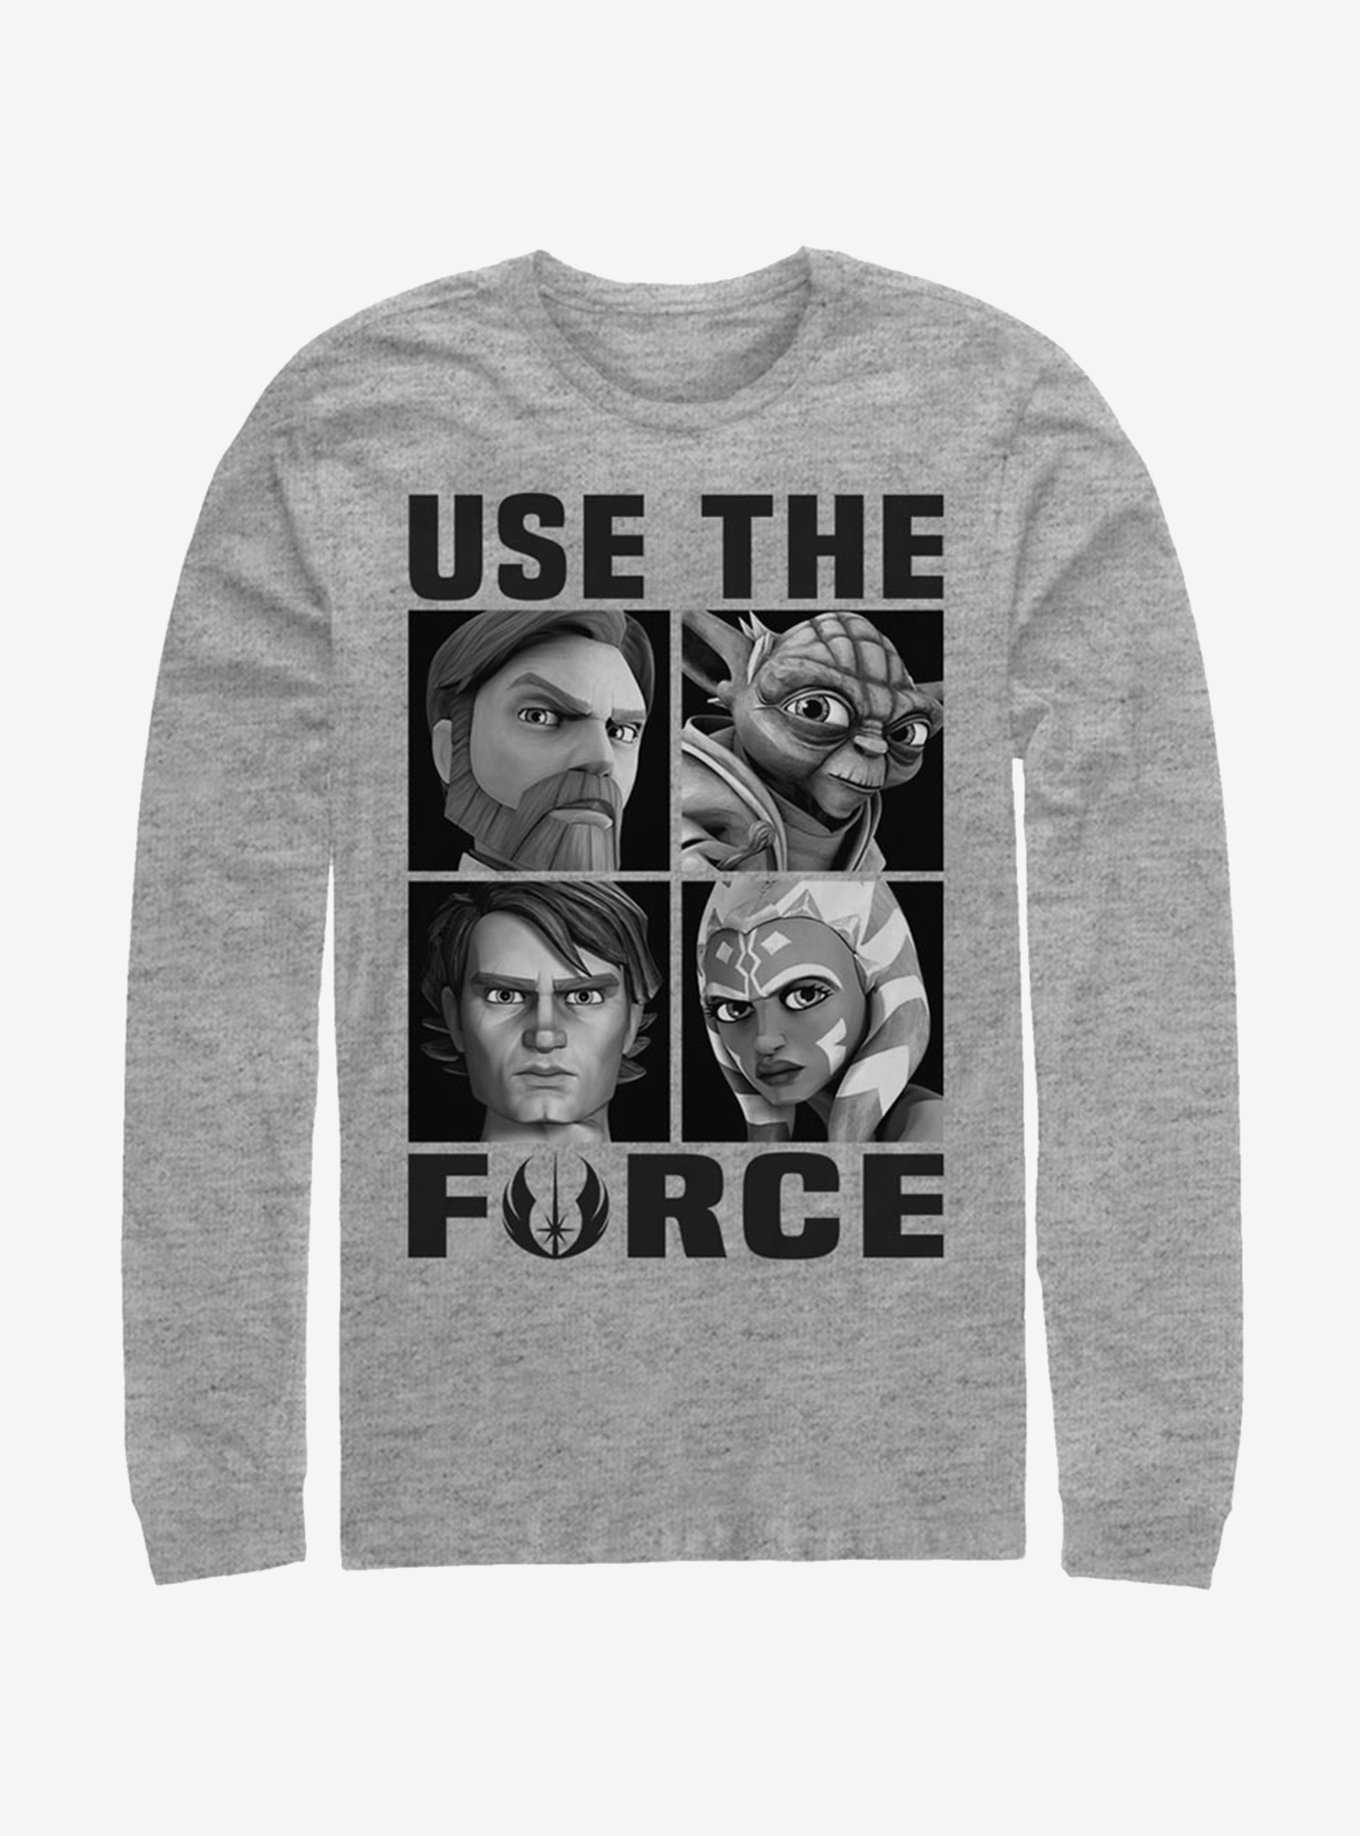 Star Wars The Clone Wars Force Users Long-Sleeve T-Shirt, , hi-res